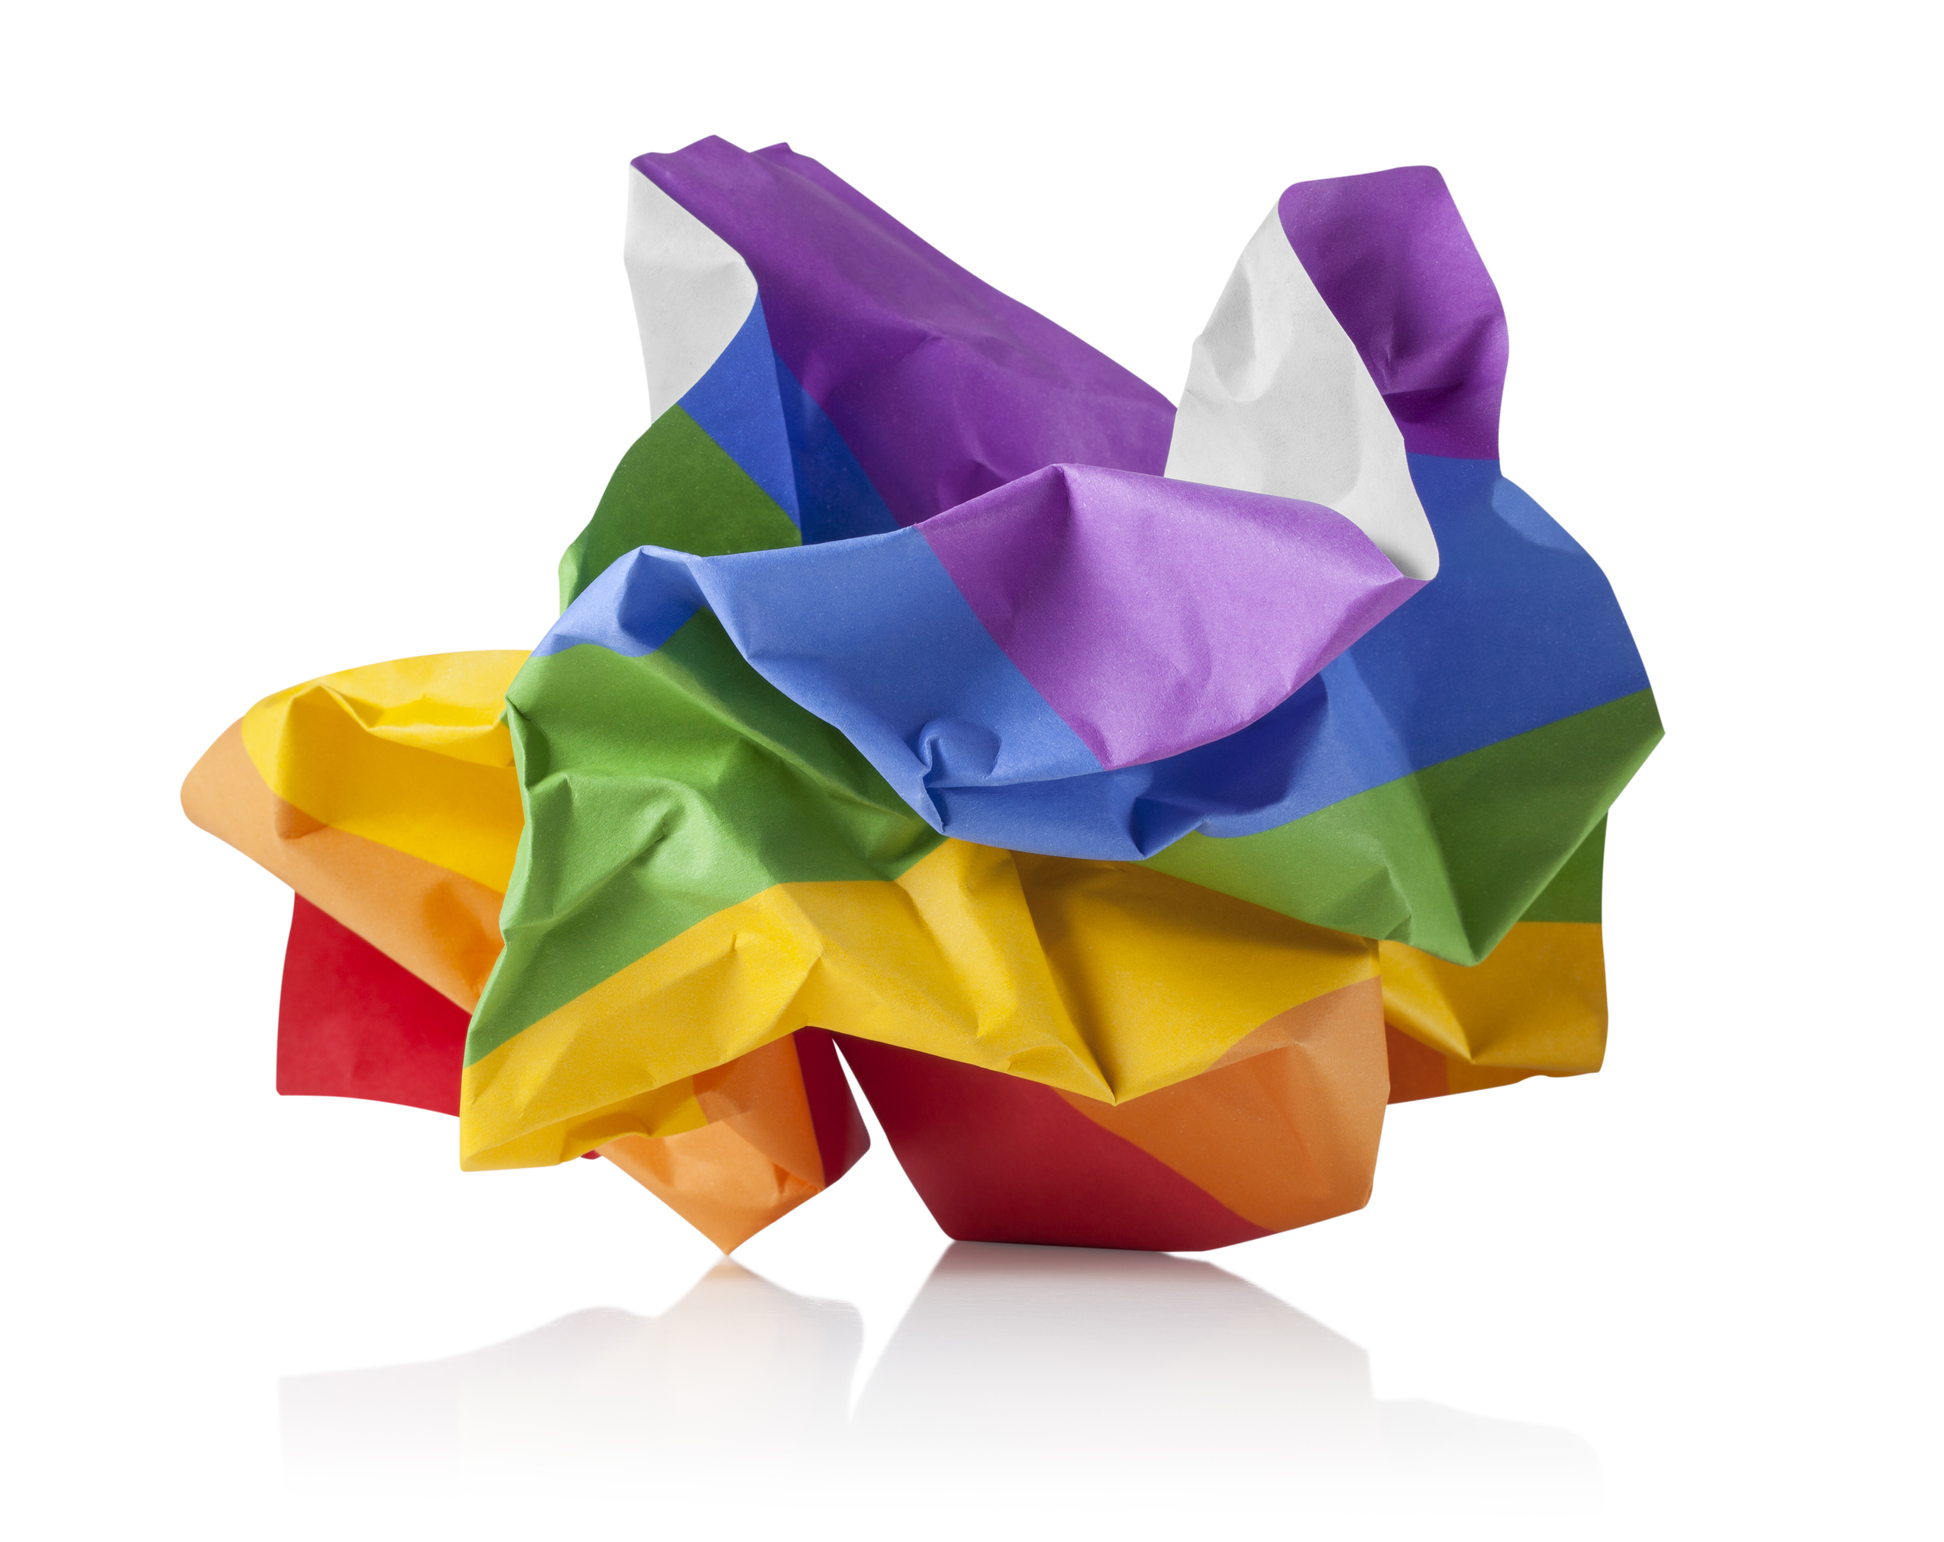 Crumpled paper ball with the colors of the rainbow on white background